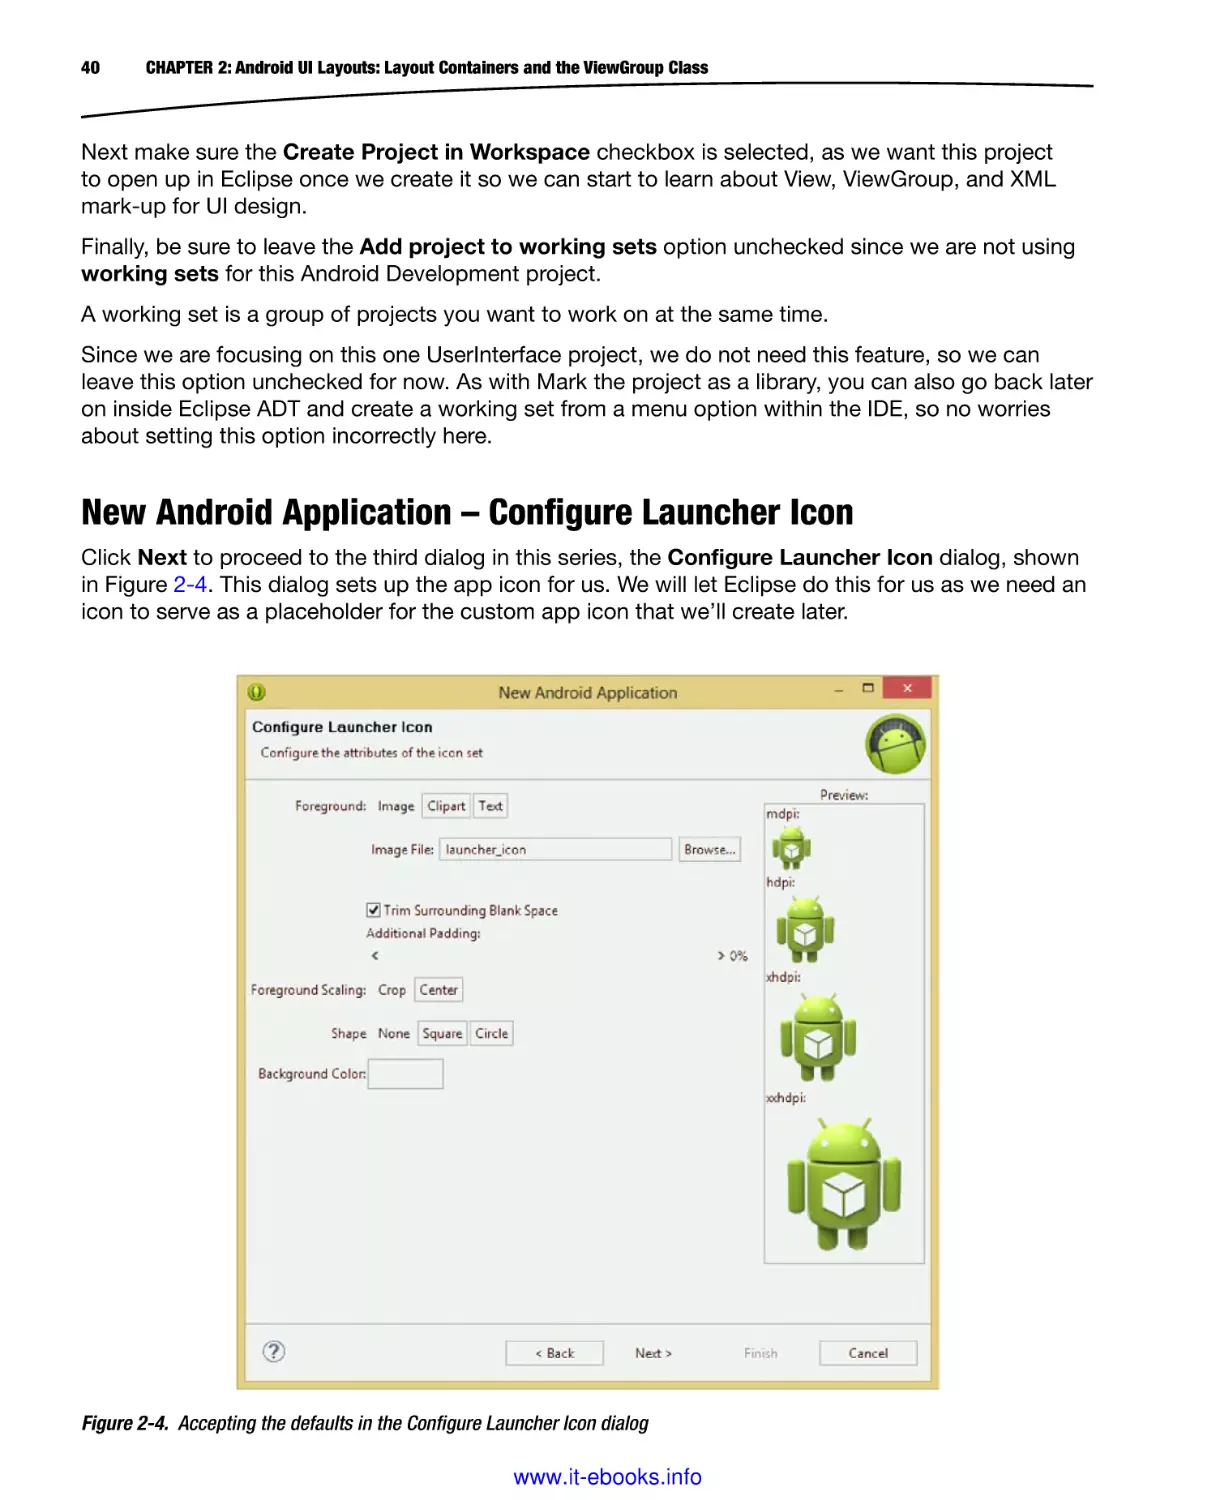 New Android Application – Configure Launcher Icon